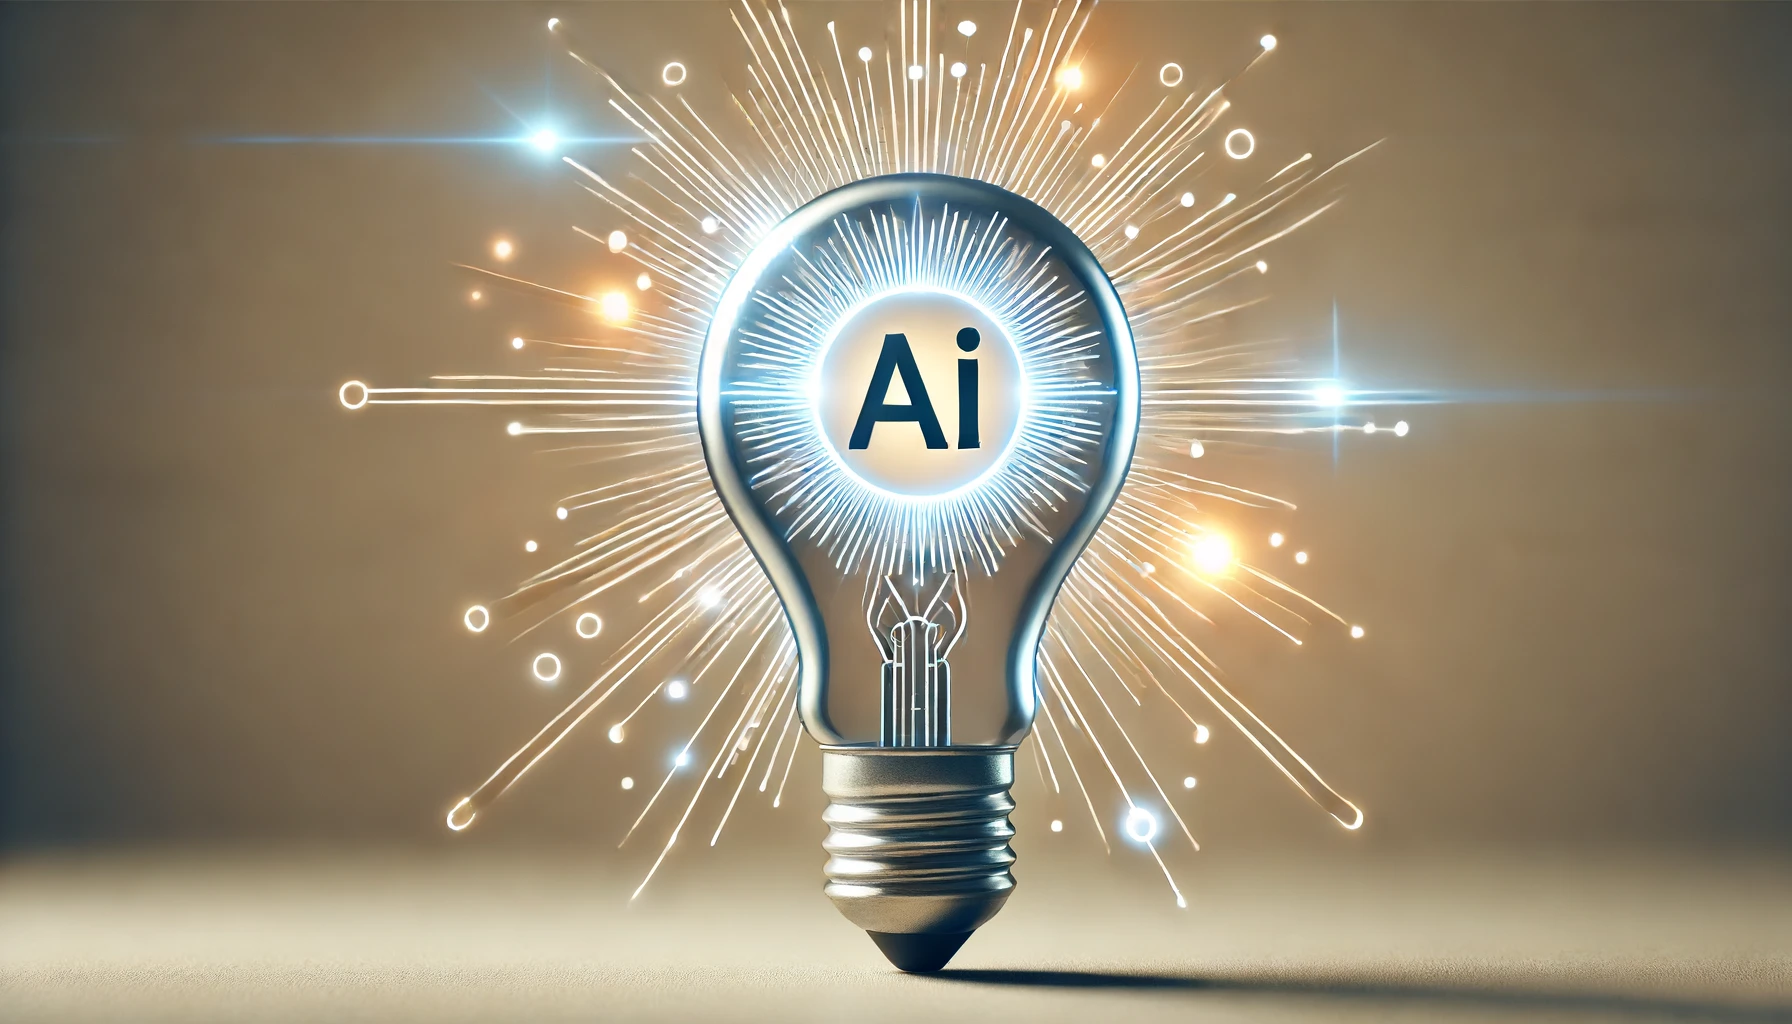 A stylized lightbulb with a glowing logo inside, symbolizing the creativity and inspiration sparked by AI logo generators.